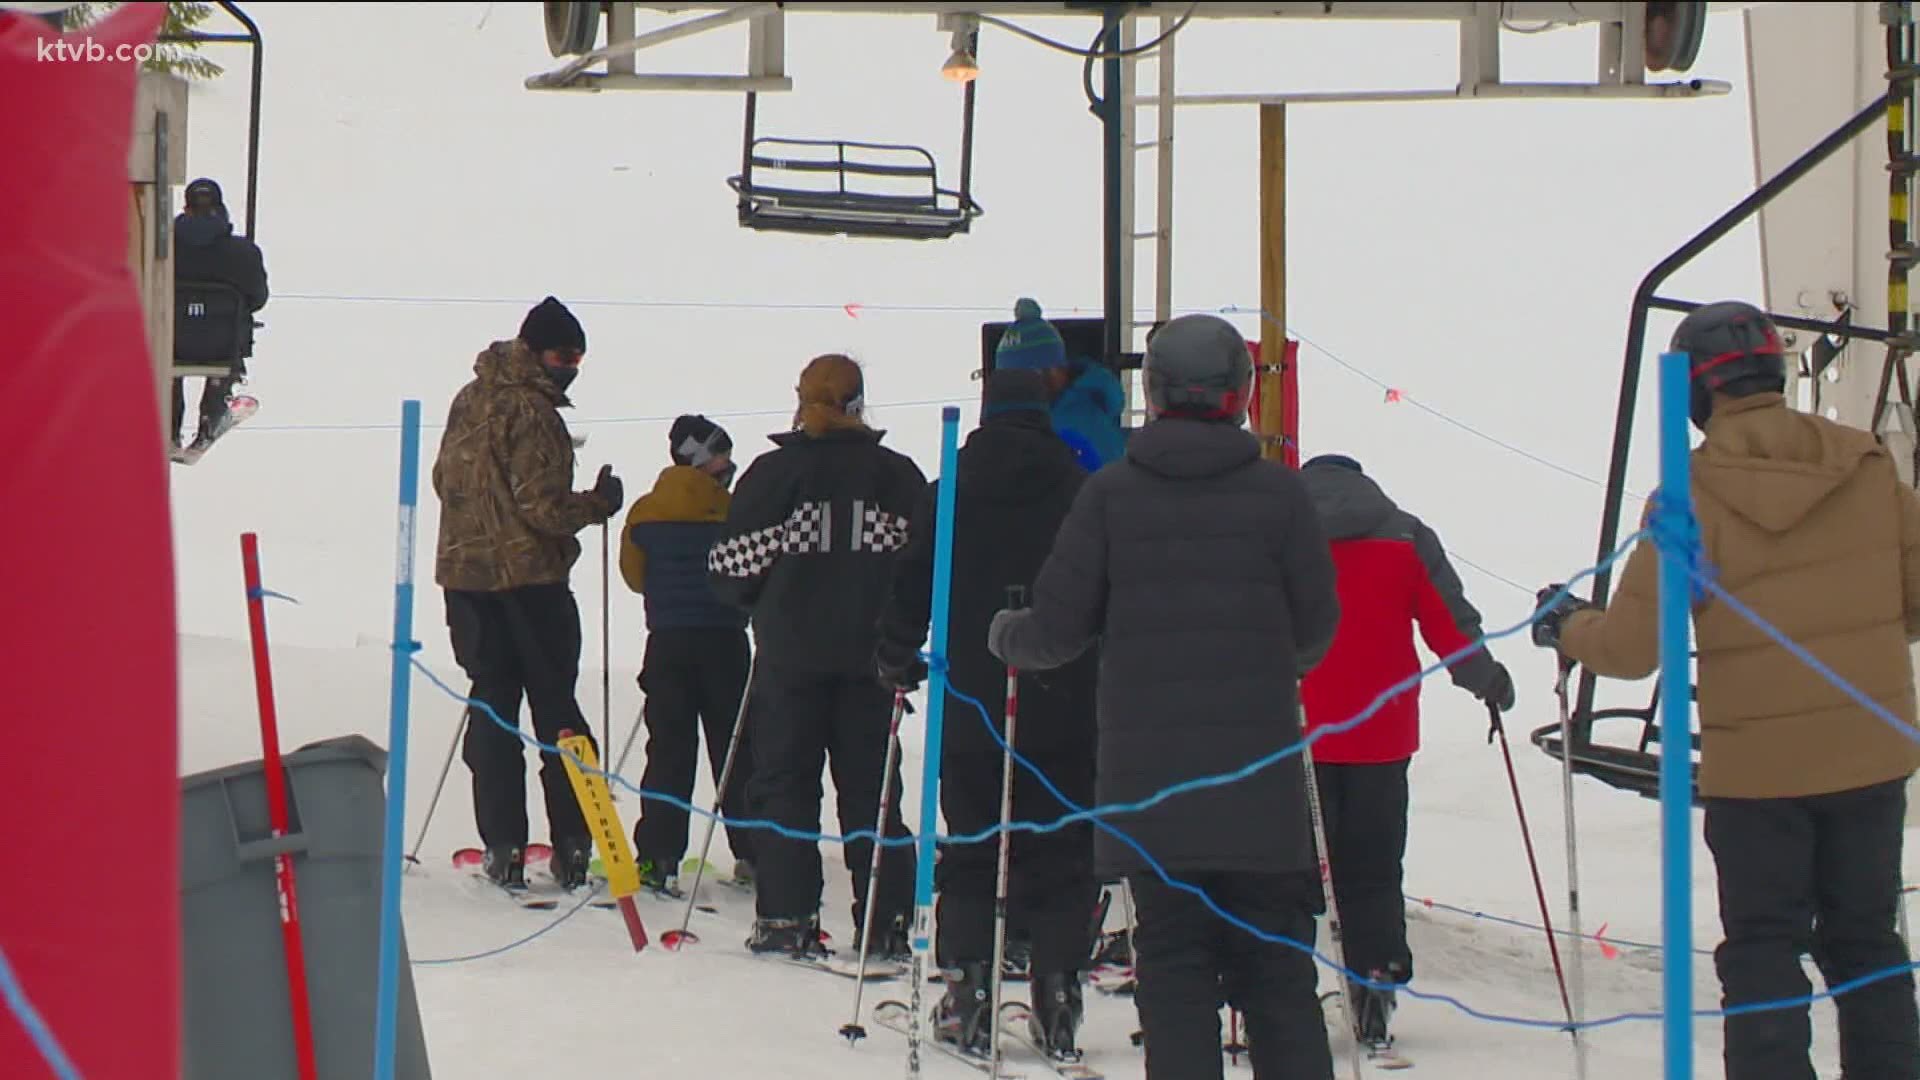 General Manager Brad Wilson says Bogus Basin will be open Saturday, April 17 and Sunday, April 18.